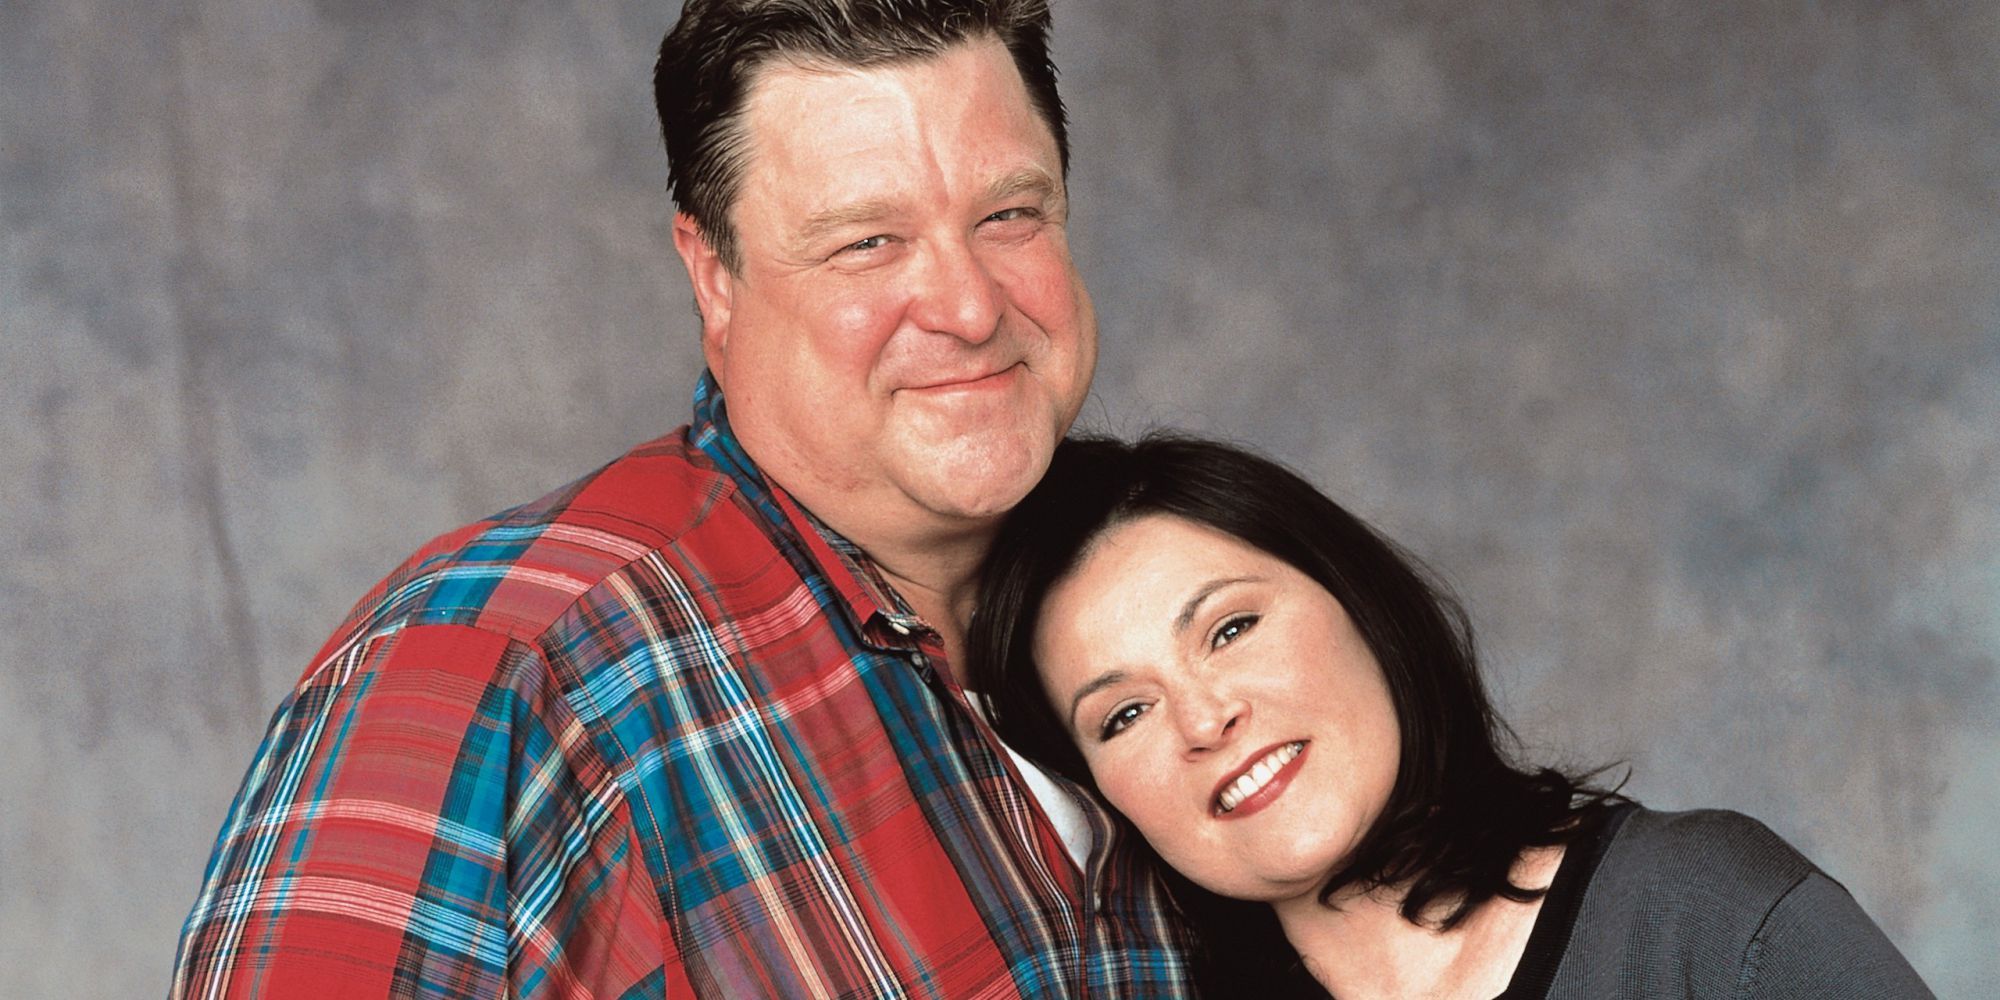 10 Sitcom Relationships From The 90s That Would Never Fly Today